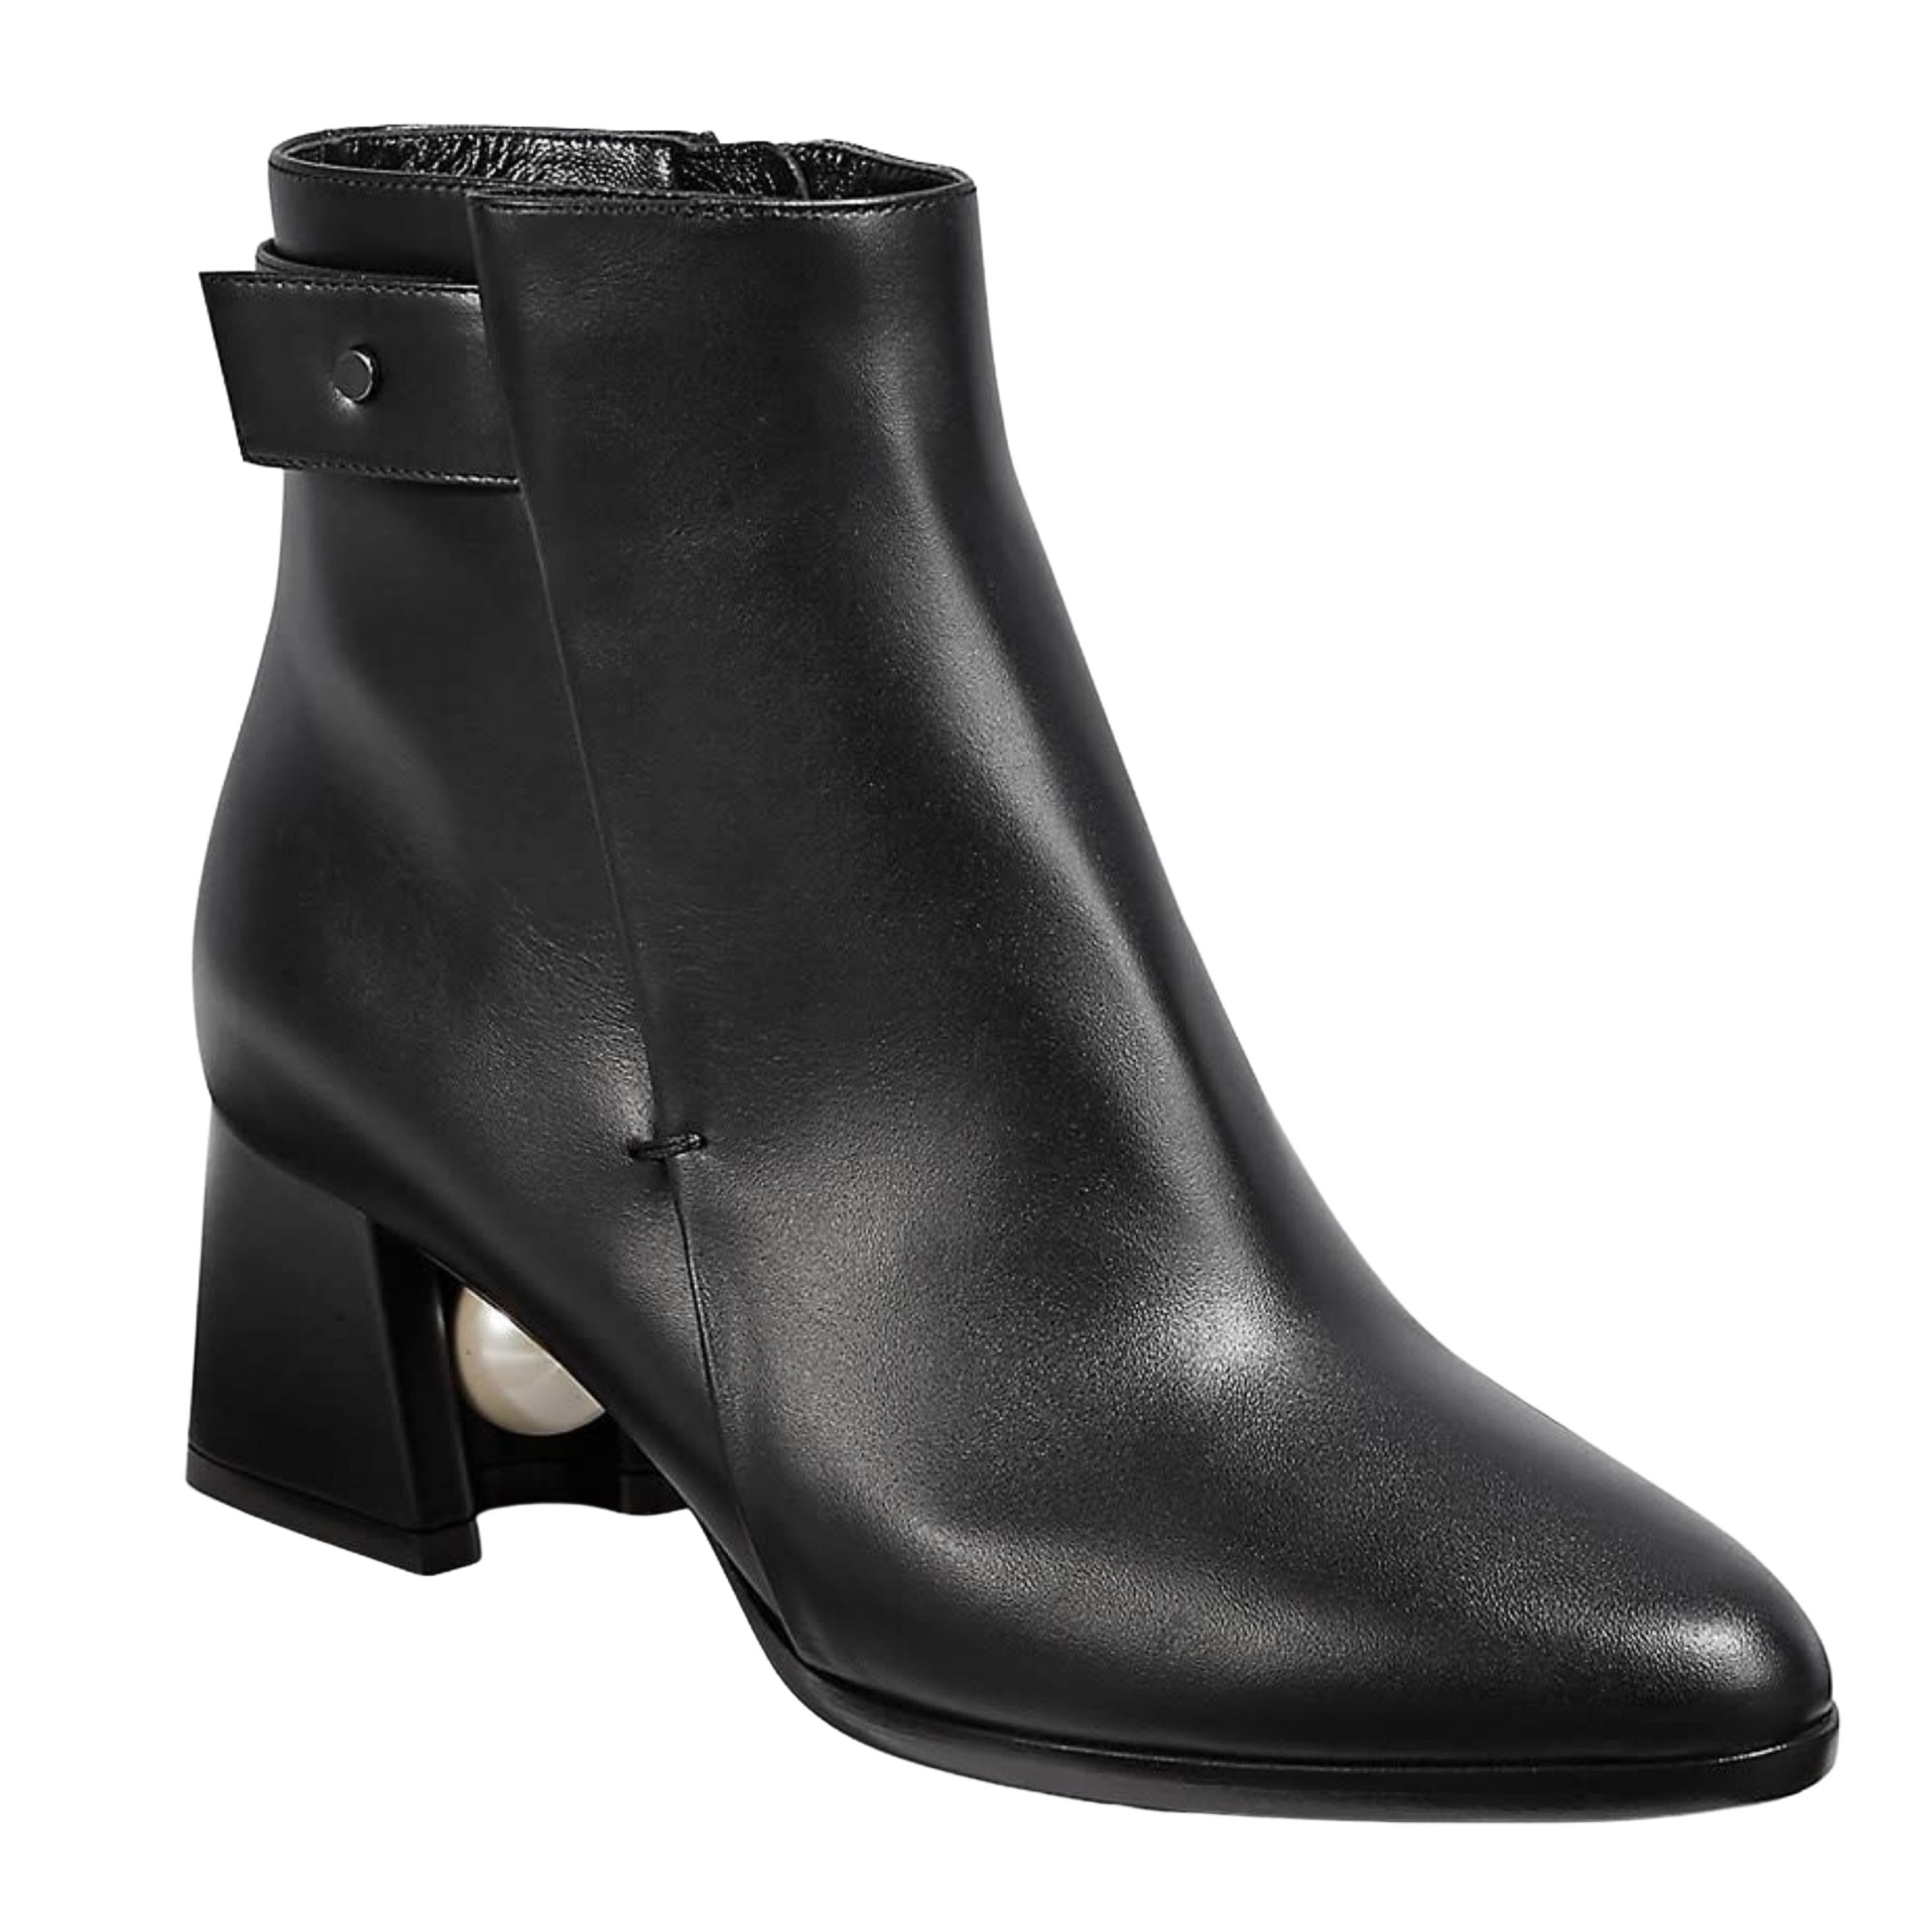  These leather ankle boots feature a classic Nicholas Kirkwood faux pearl under the heel for a chic look. Leather upper, almond toe, side zip, leather lining and leather sole. (905A07VLS1-N99-36.0)

COLOR: Black
MATERIAL: Leather
SIZE: 36 EU / 5